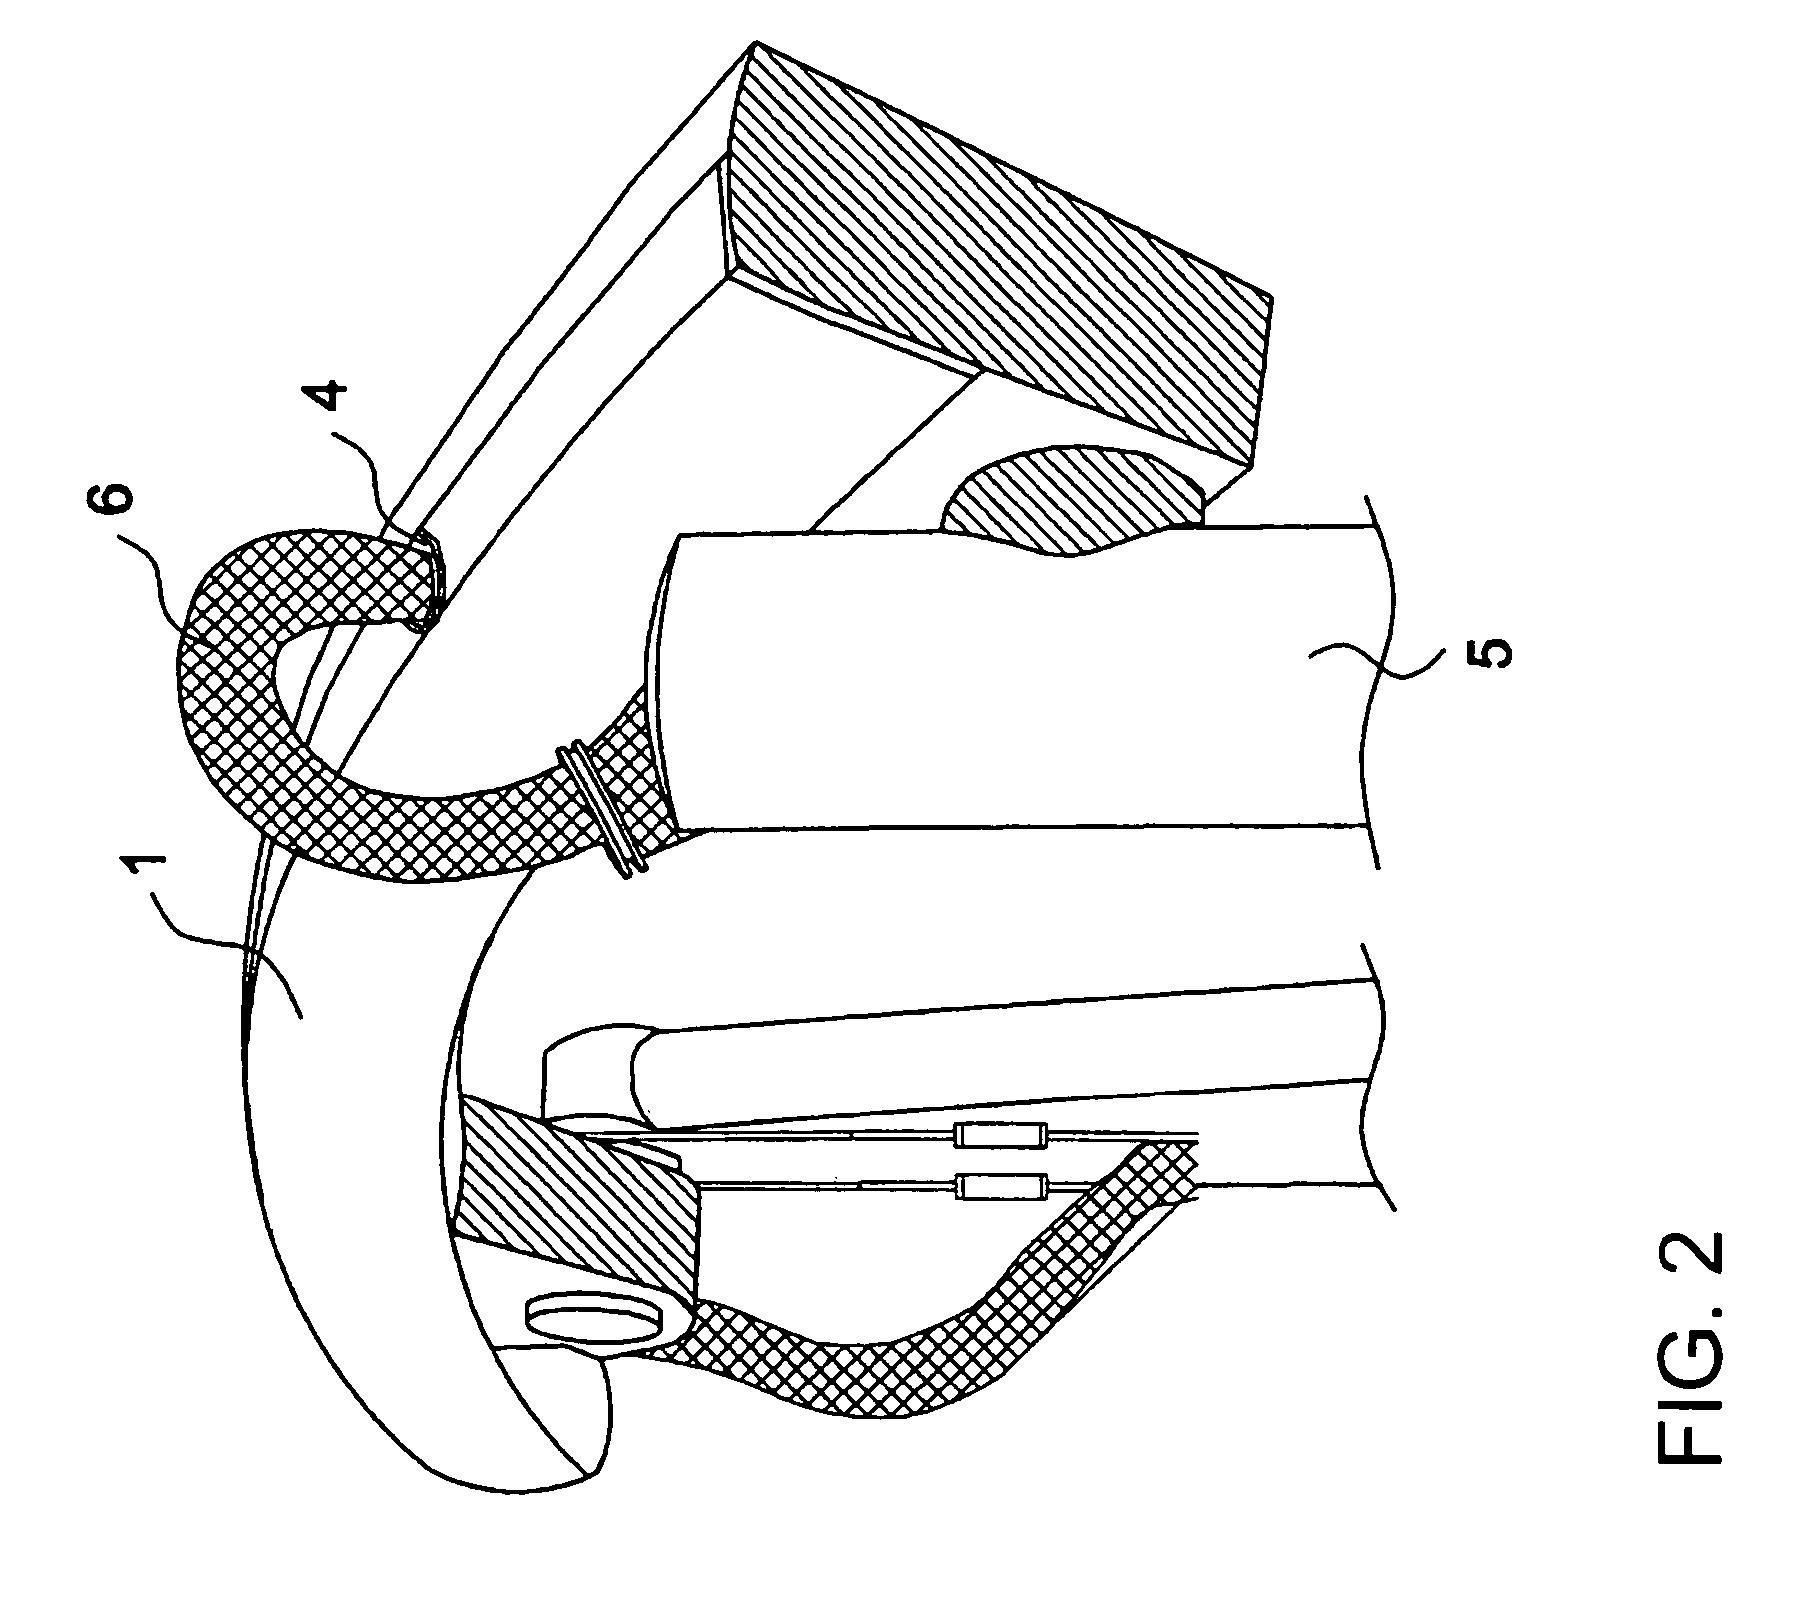 Device holding apparatus